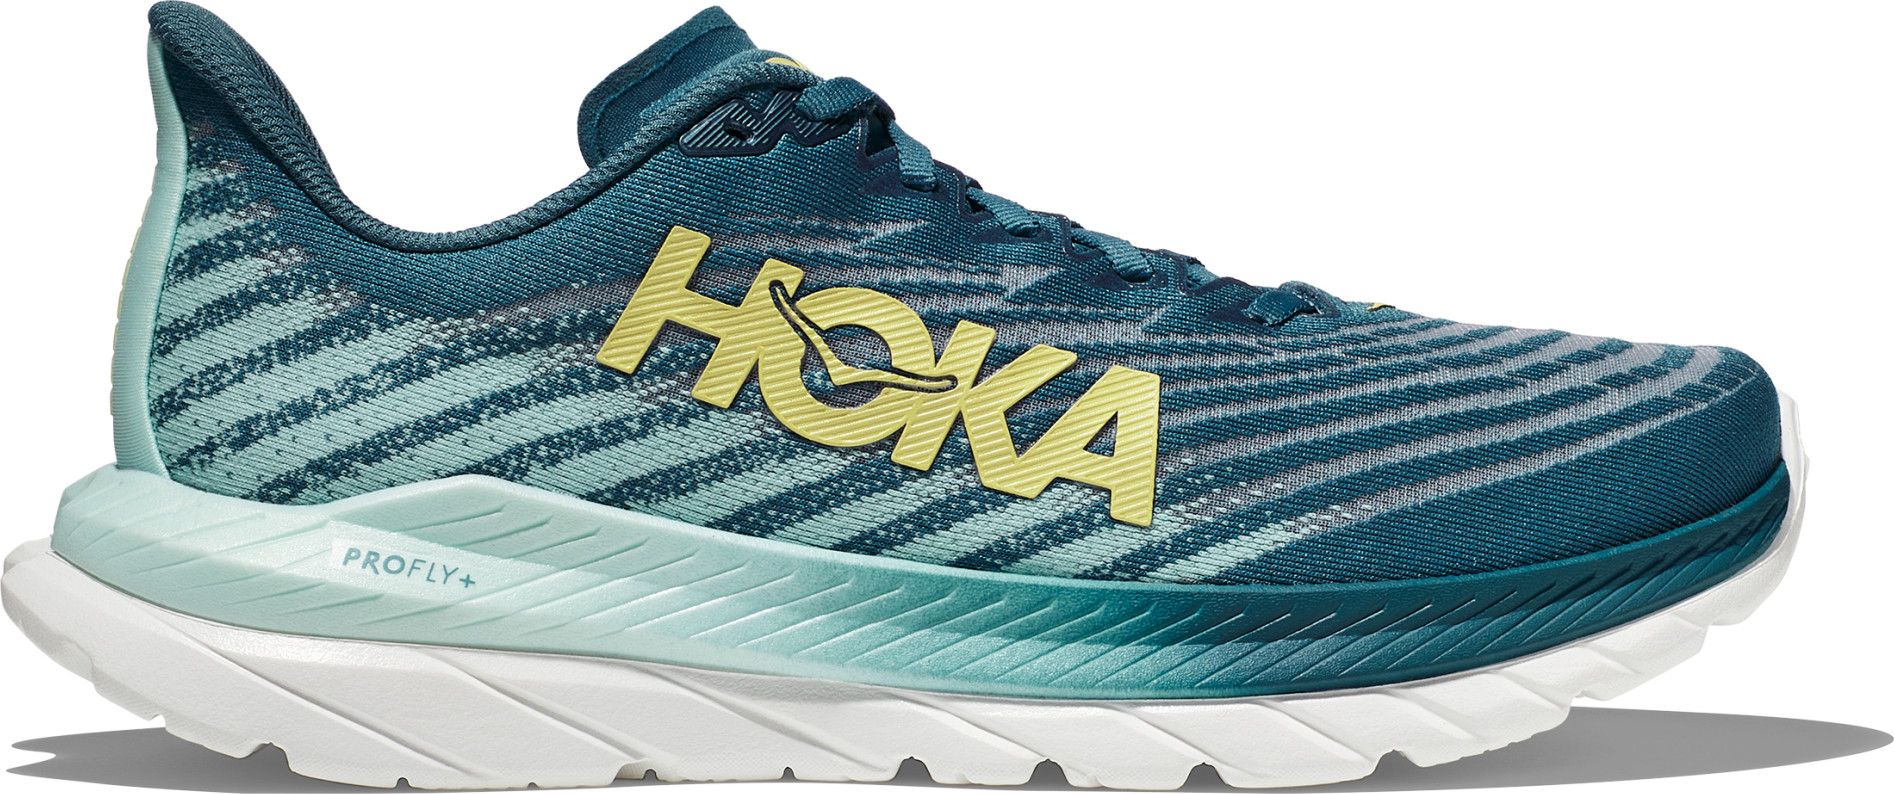 Hoka One One Mens Shoes Mach Profly ￼Running Shoe Blue /white Size 11  Athletic